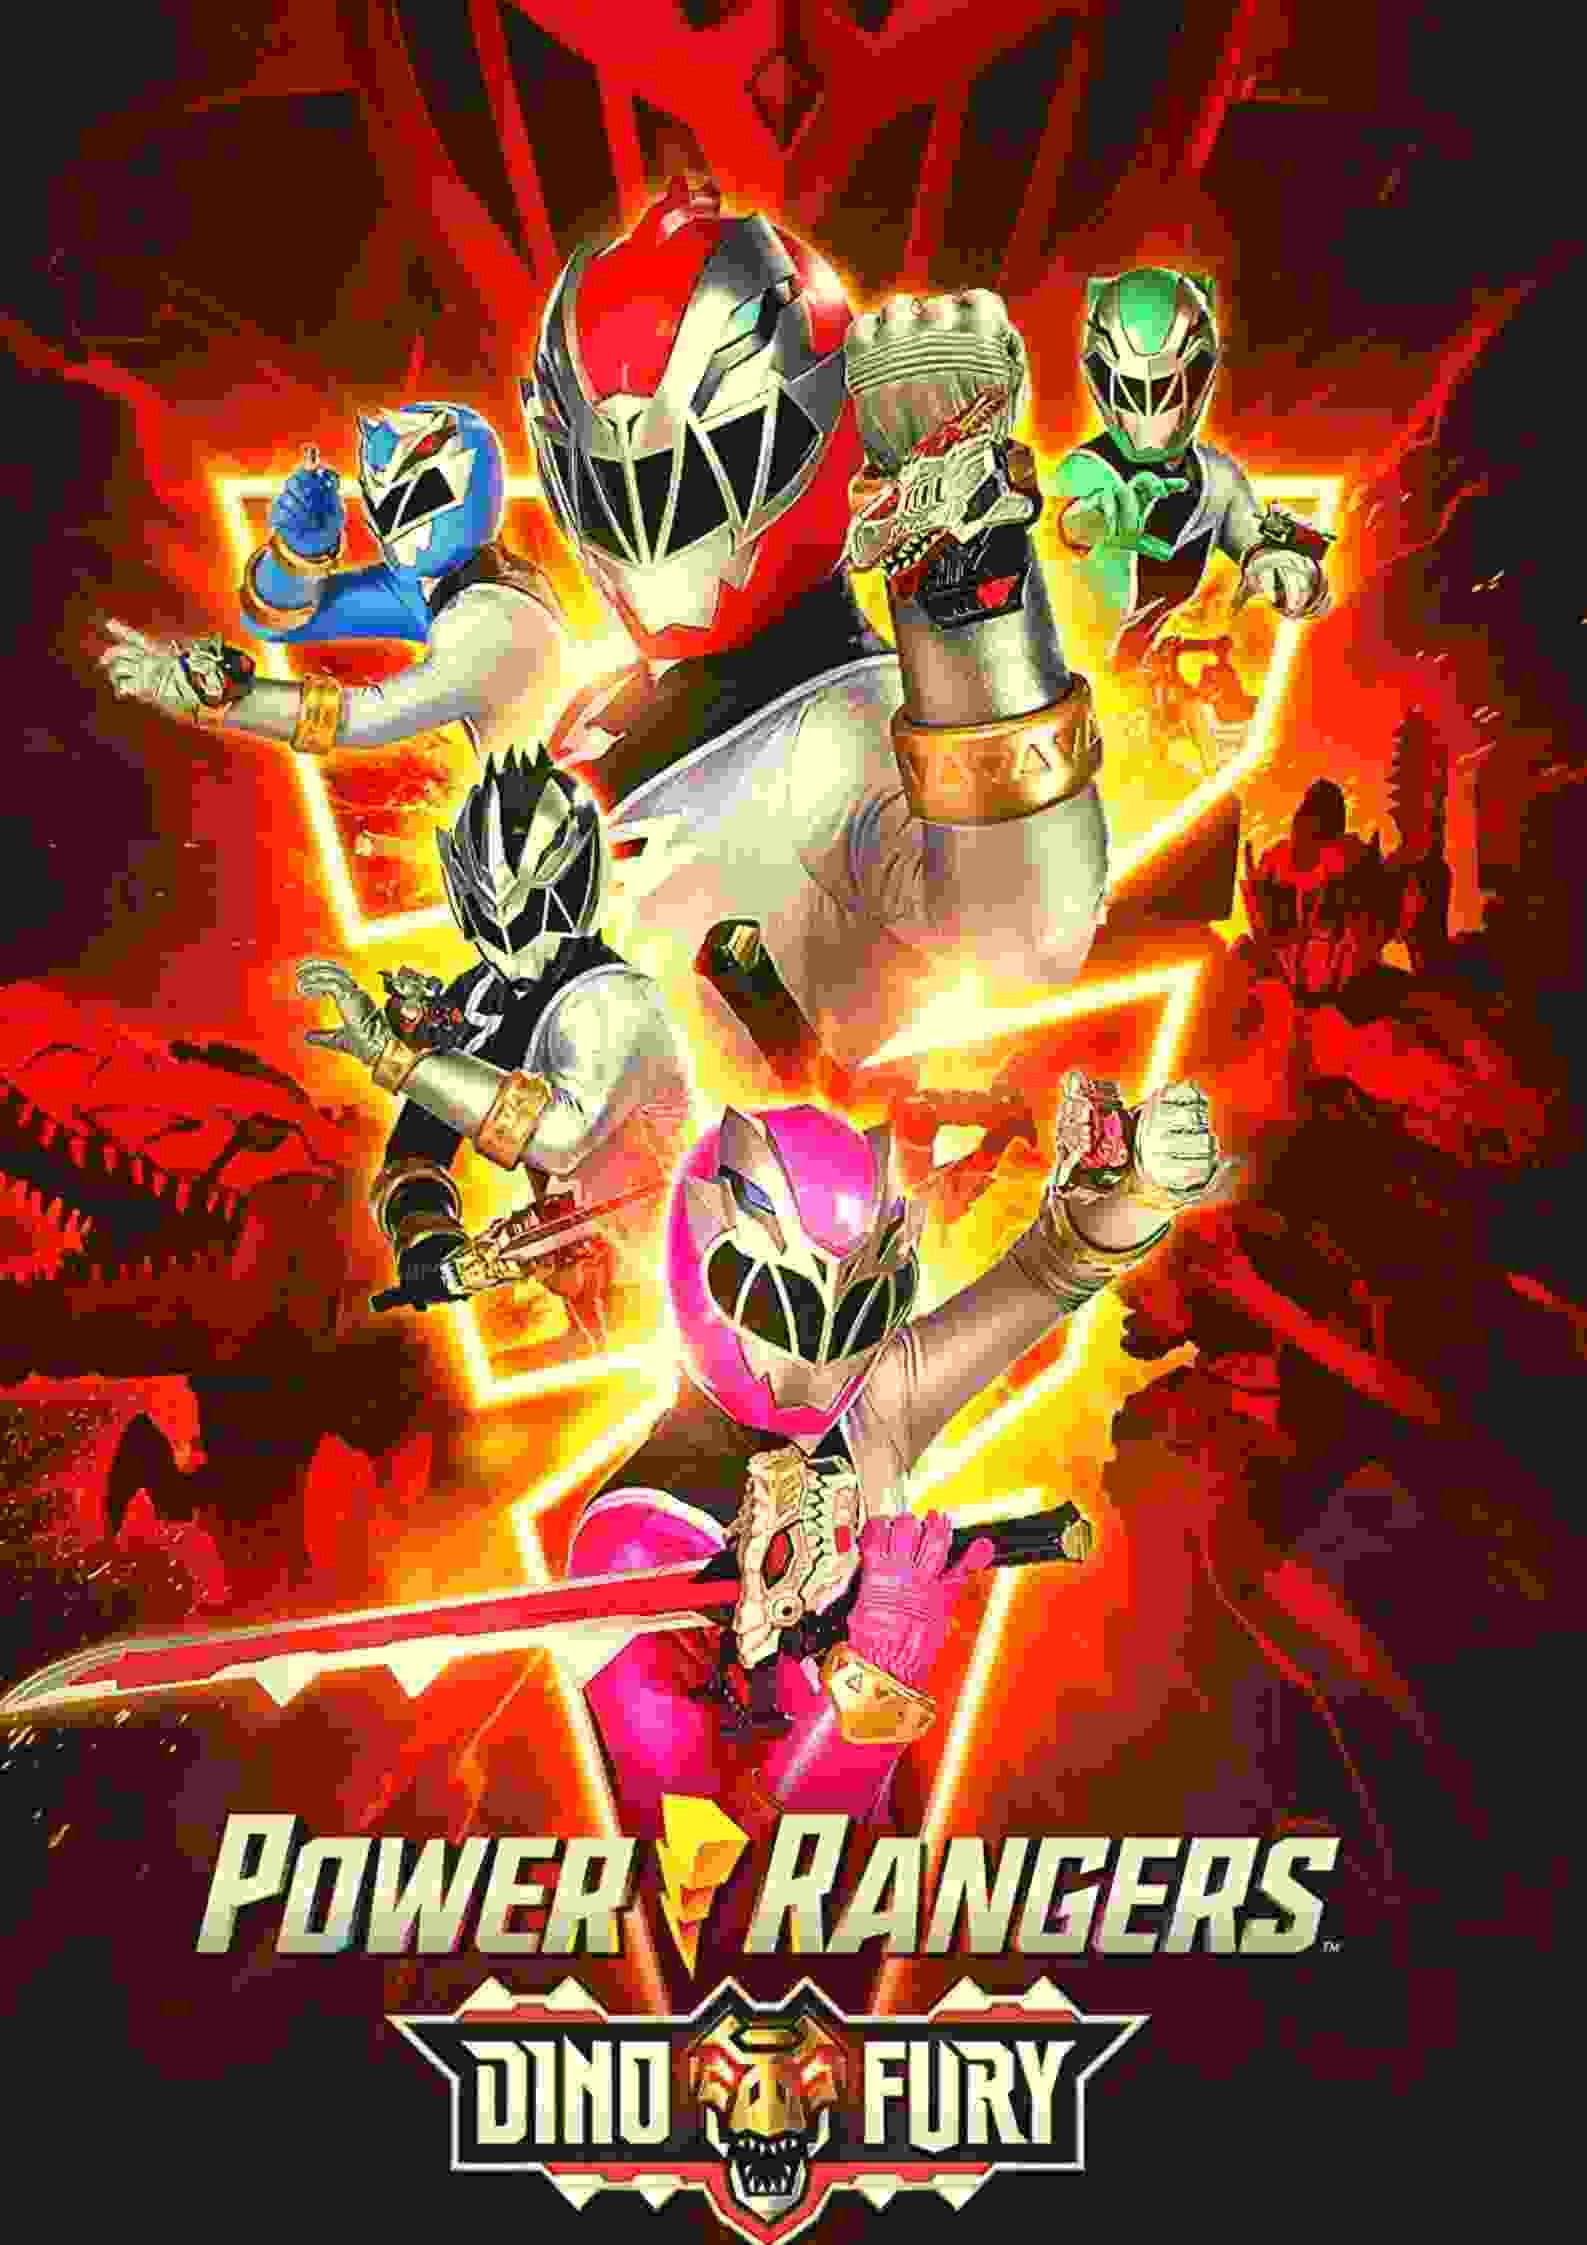 Power Rangers Dino Fury Parents guide and age rating | 2022